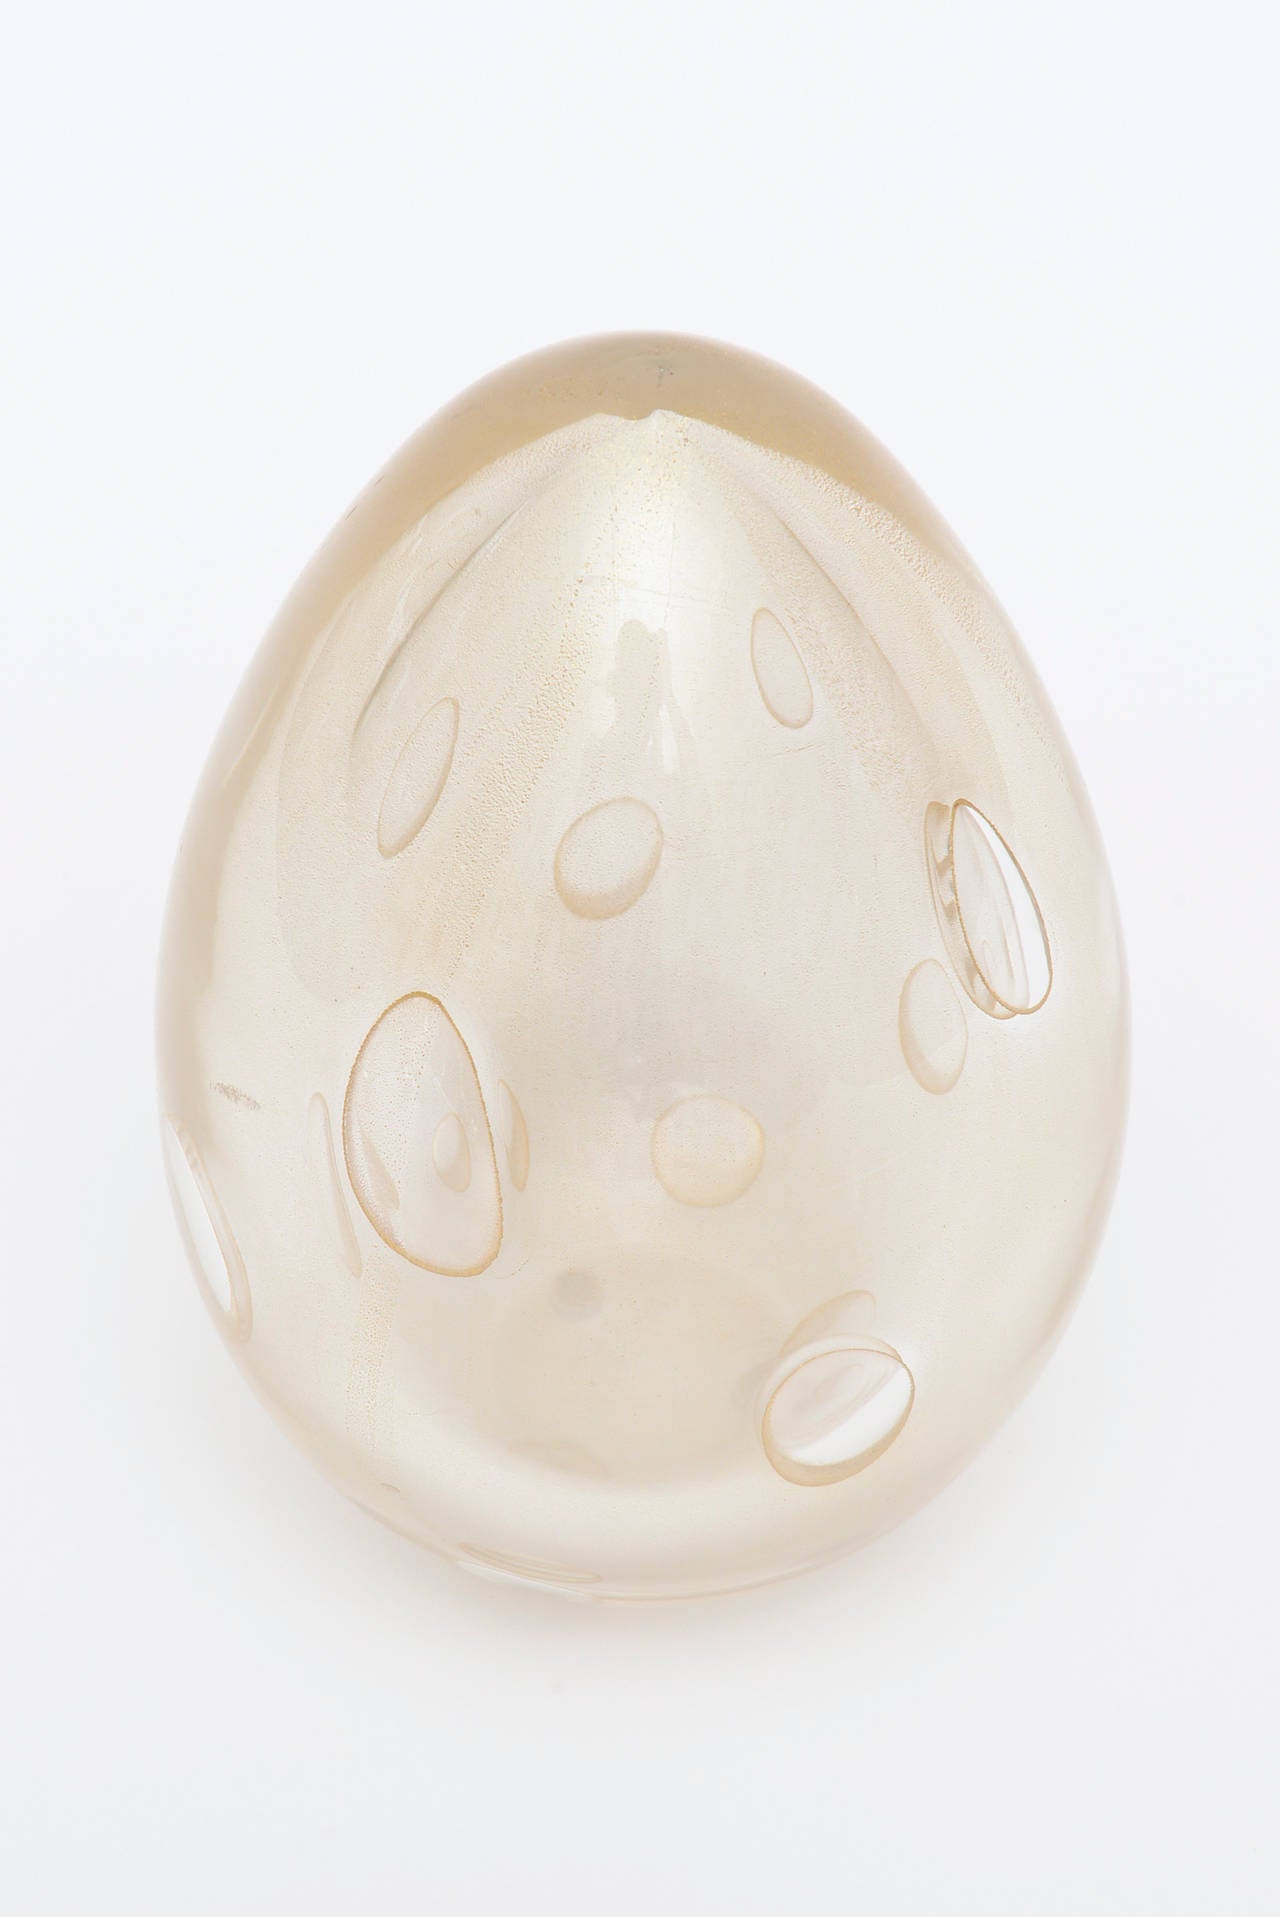 This wonderful Archimede Seguso Italian Murano Mid-Century Modern vintage sculptural piece of beautiful glass is in the shape of an ovoid or egg form. The open areas where there are large almond teardrops that almost look like craters. They are